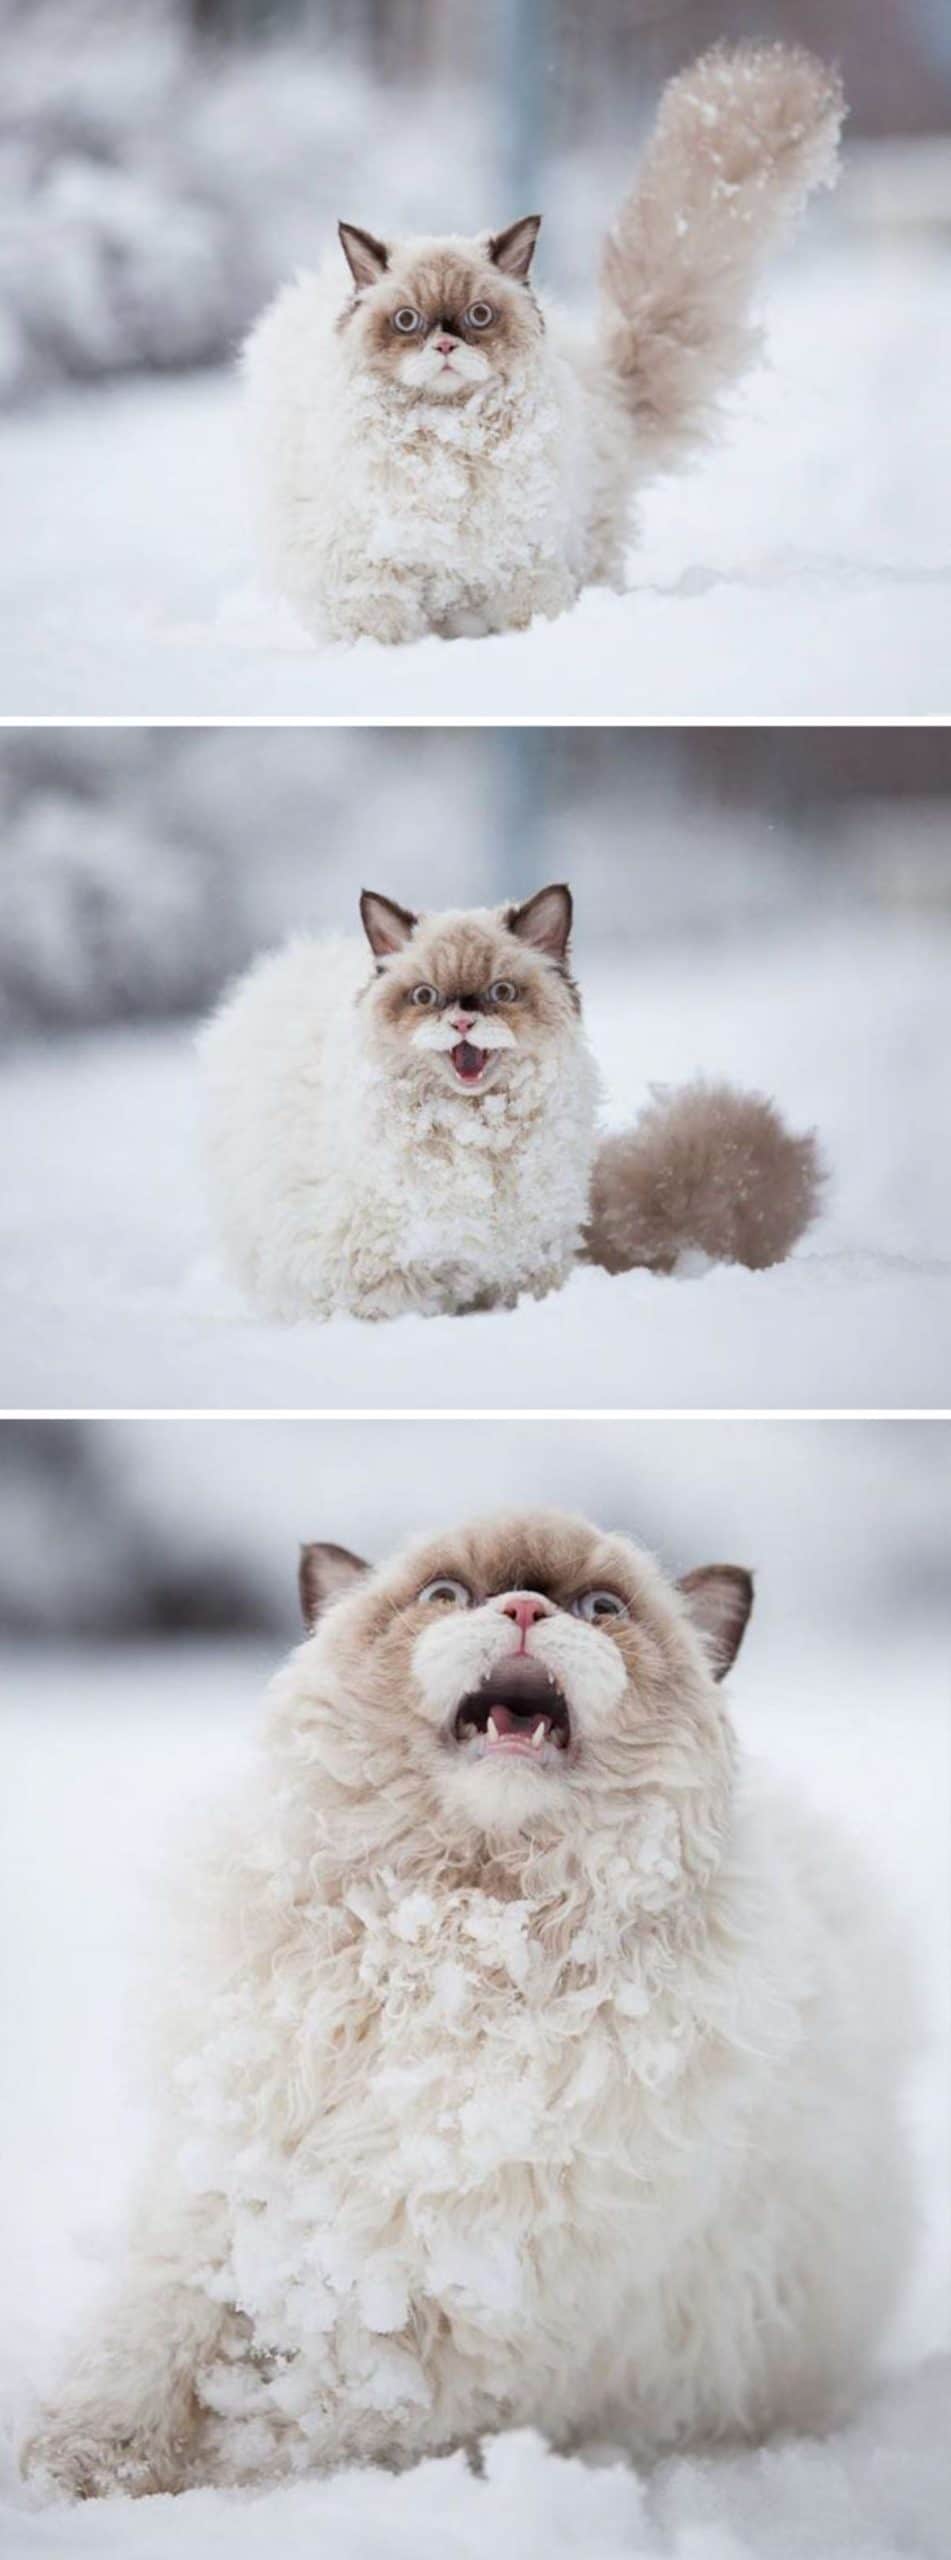 3 photos of a brown and white fluffy cat standing in snow with mouth open